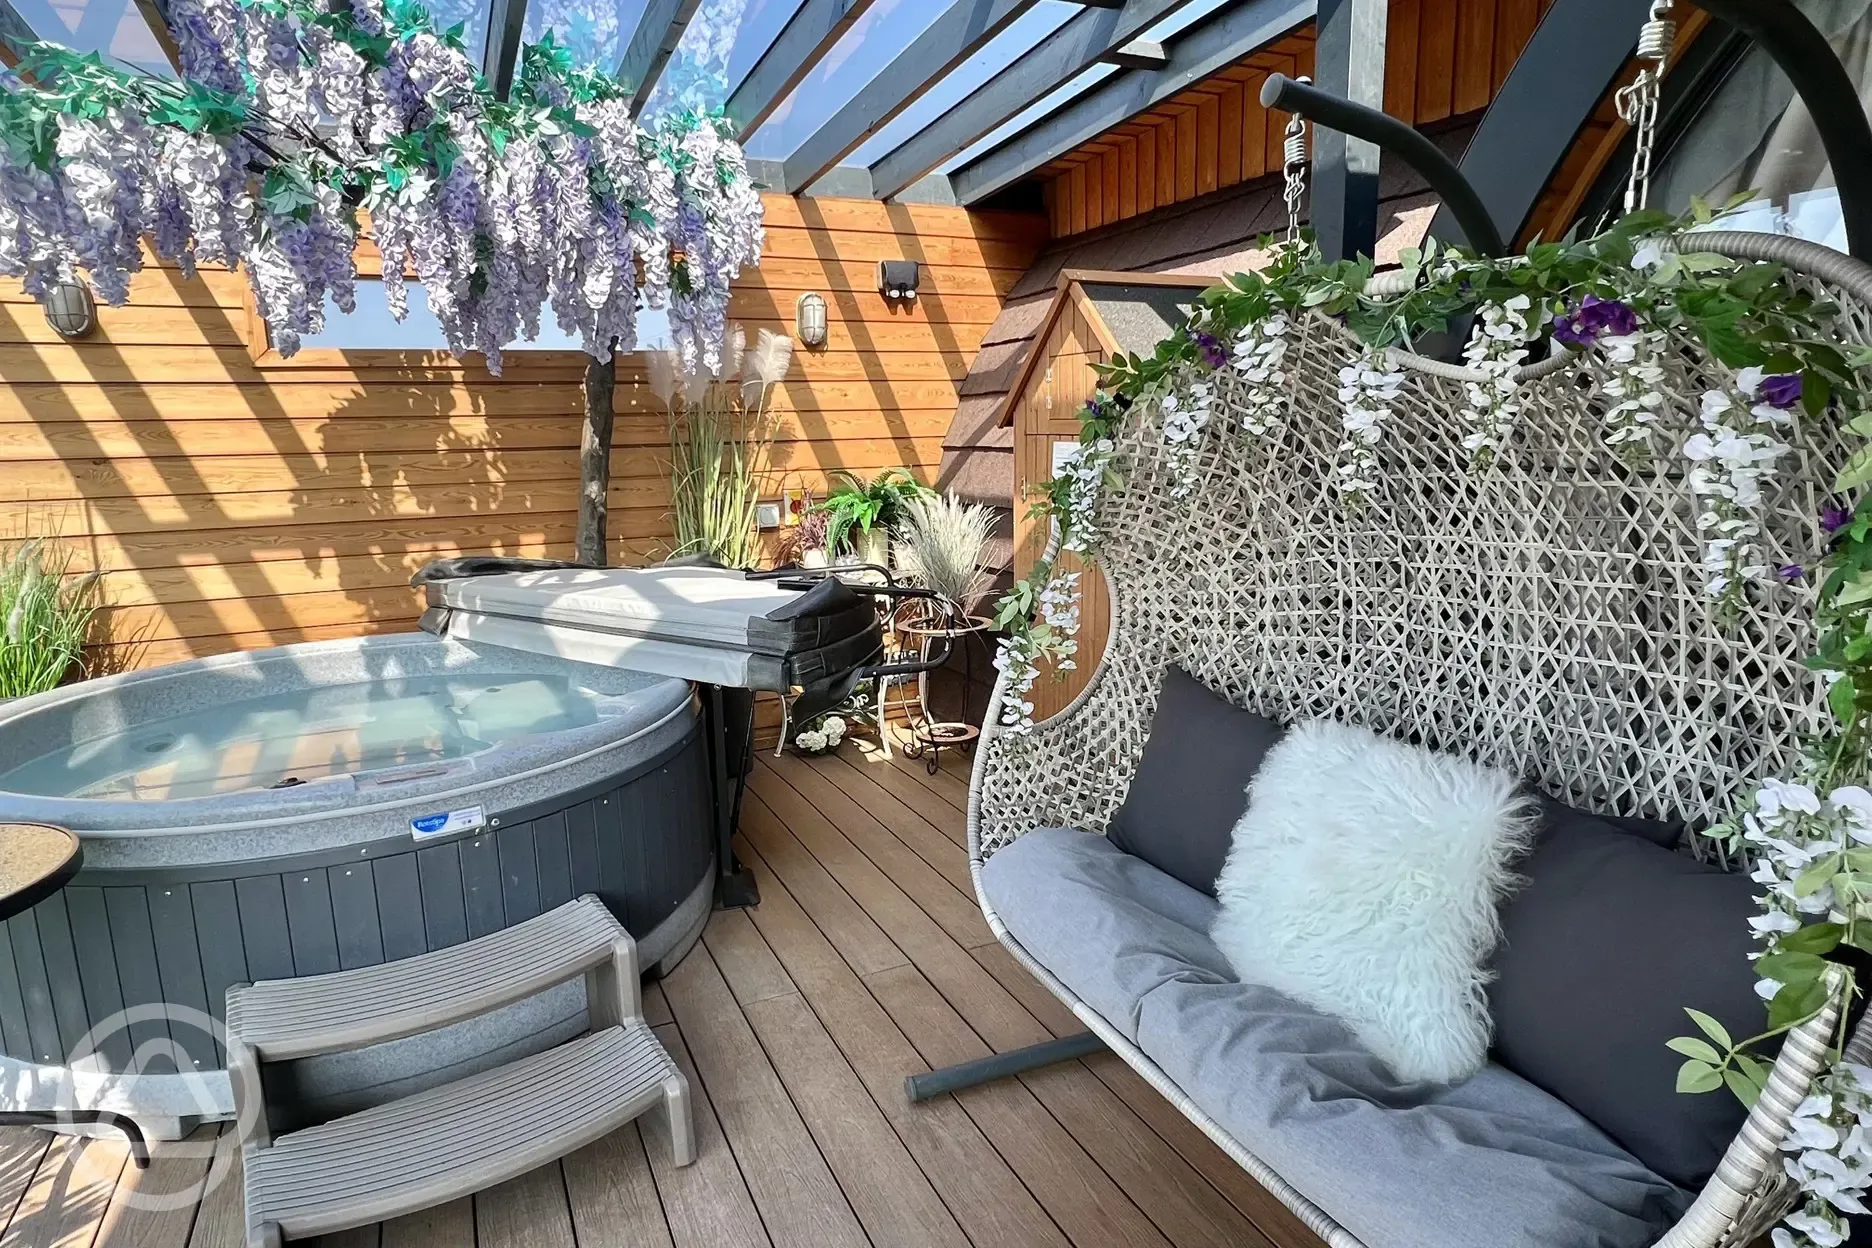 Outdoor hot tub and seat swing